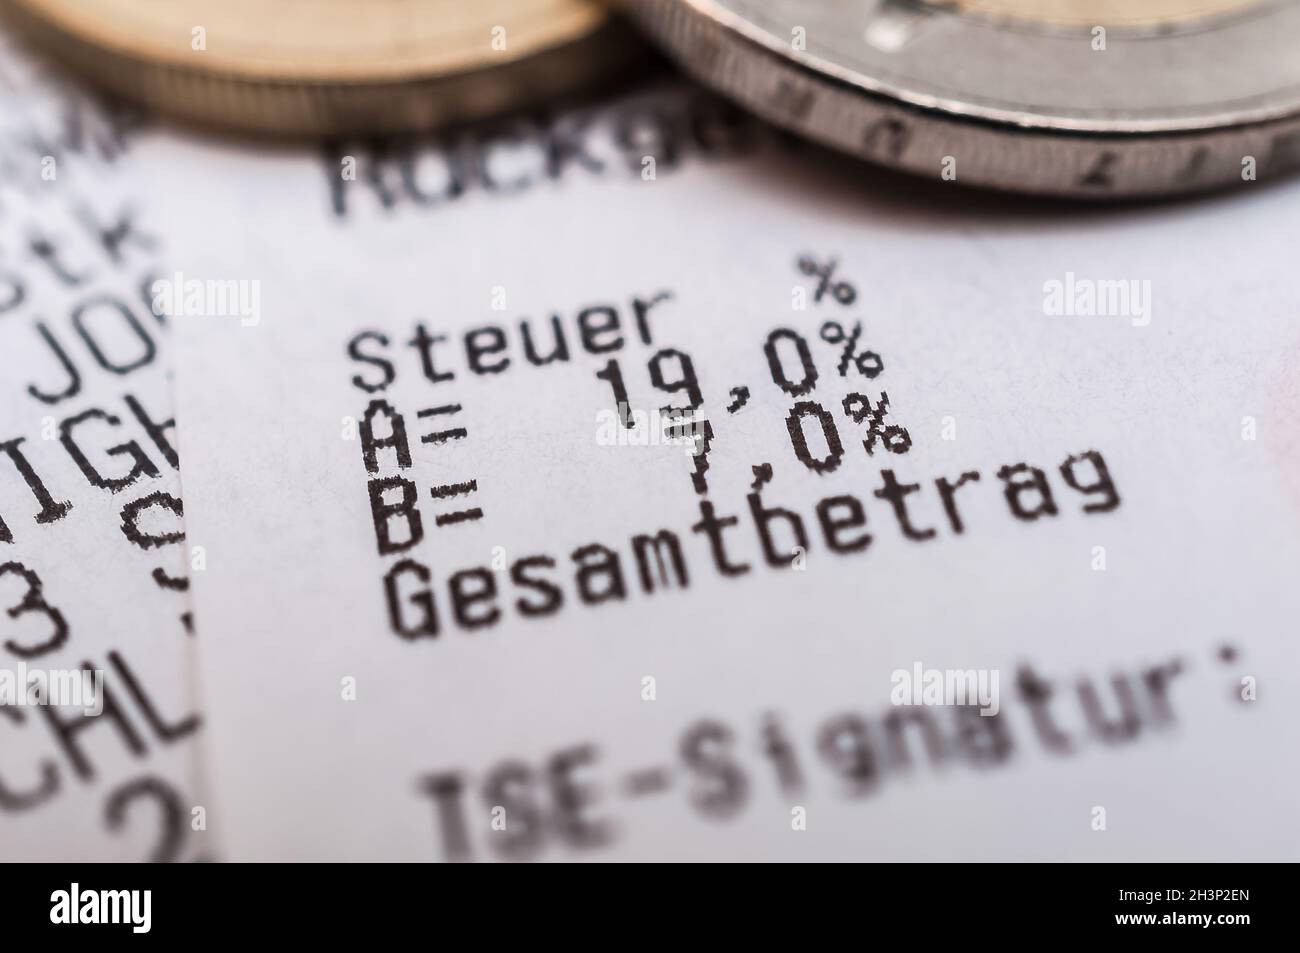 Value-added tax 19% Germany Stock Photo